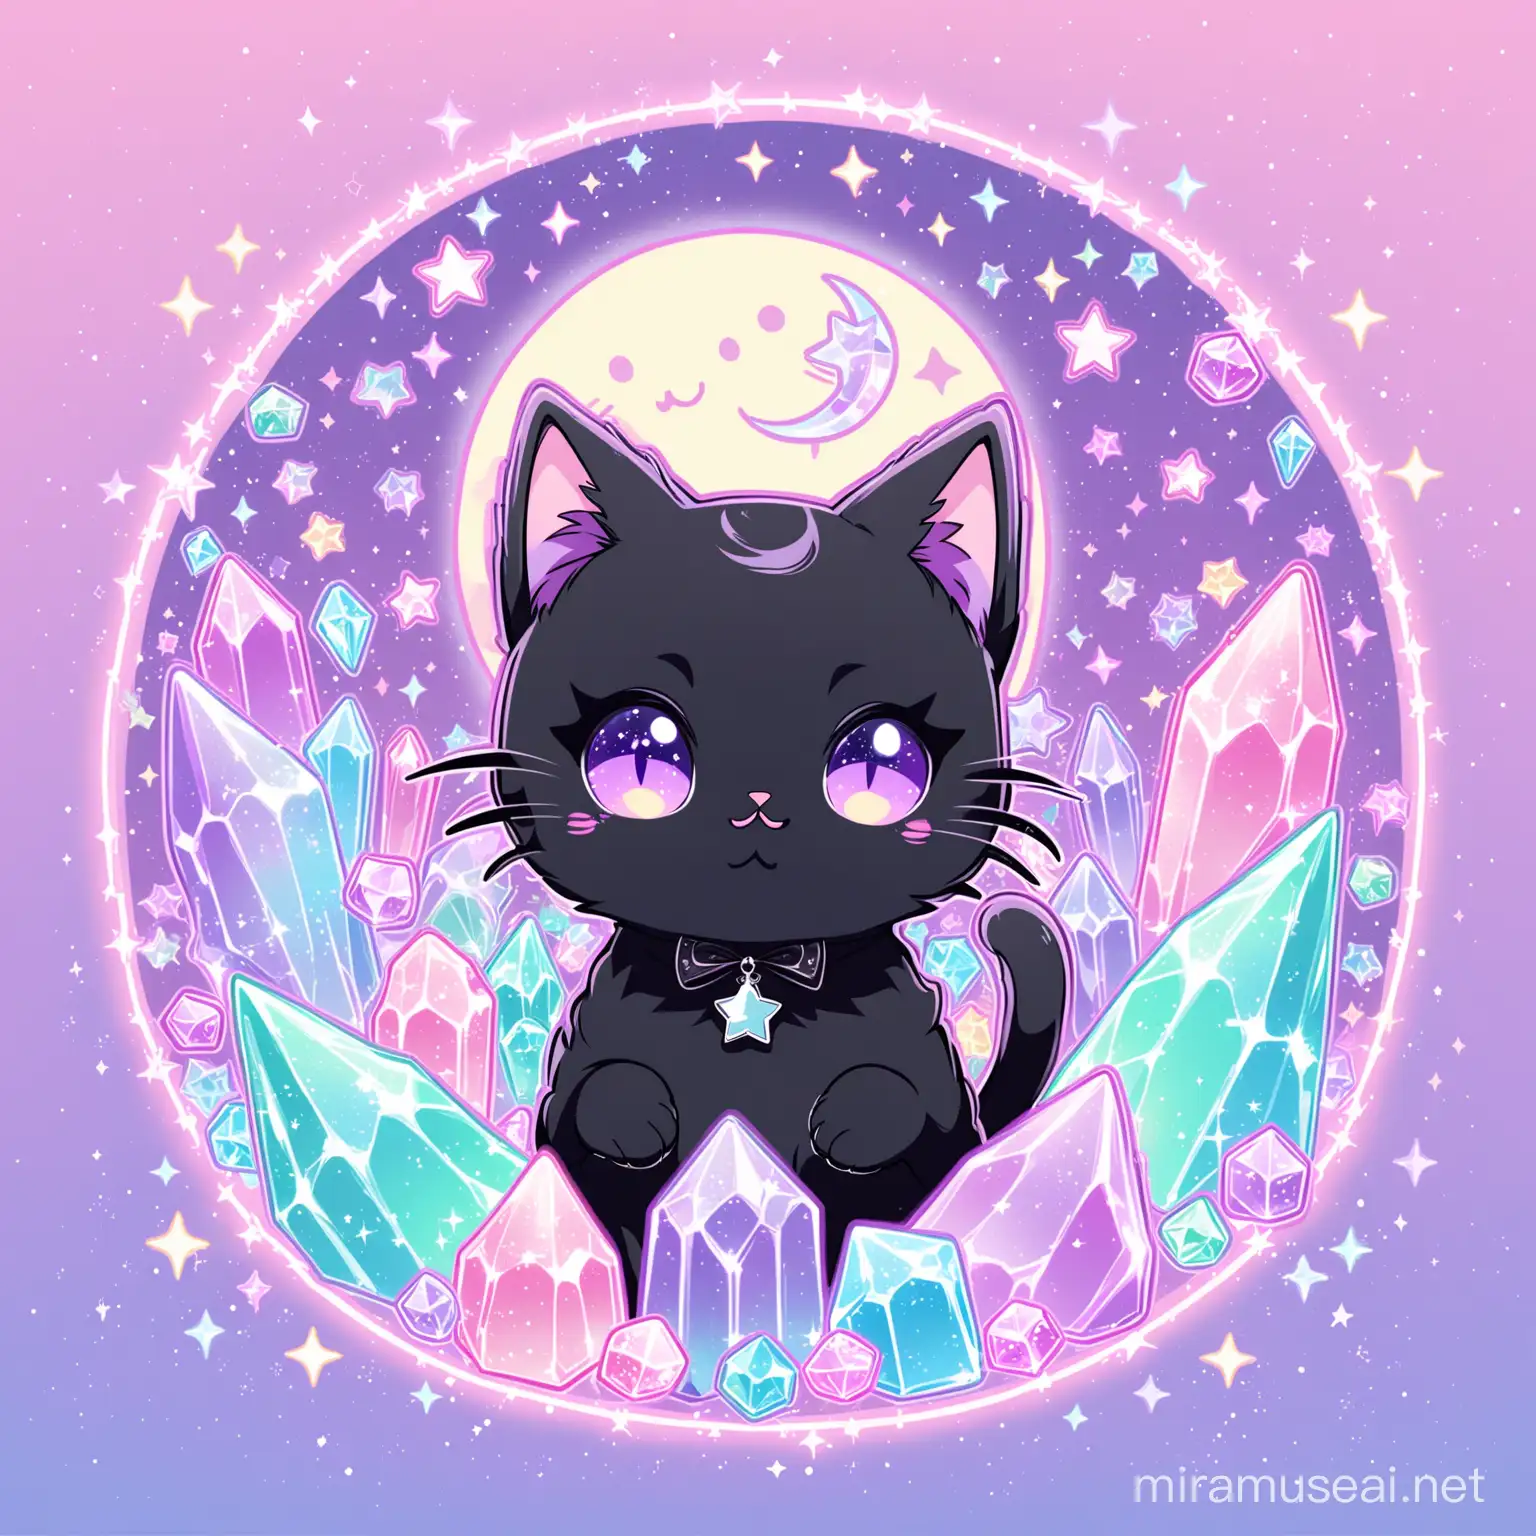 Cute Goth Cat in a Pastel Aesthetic with Crystals and Celestial Motifs